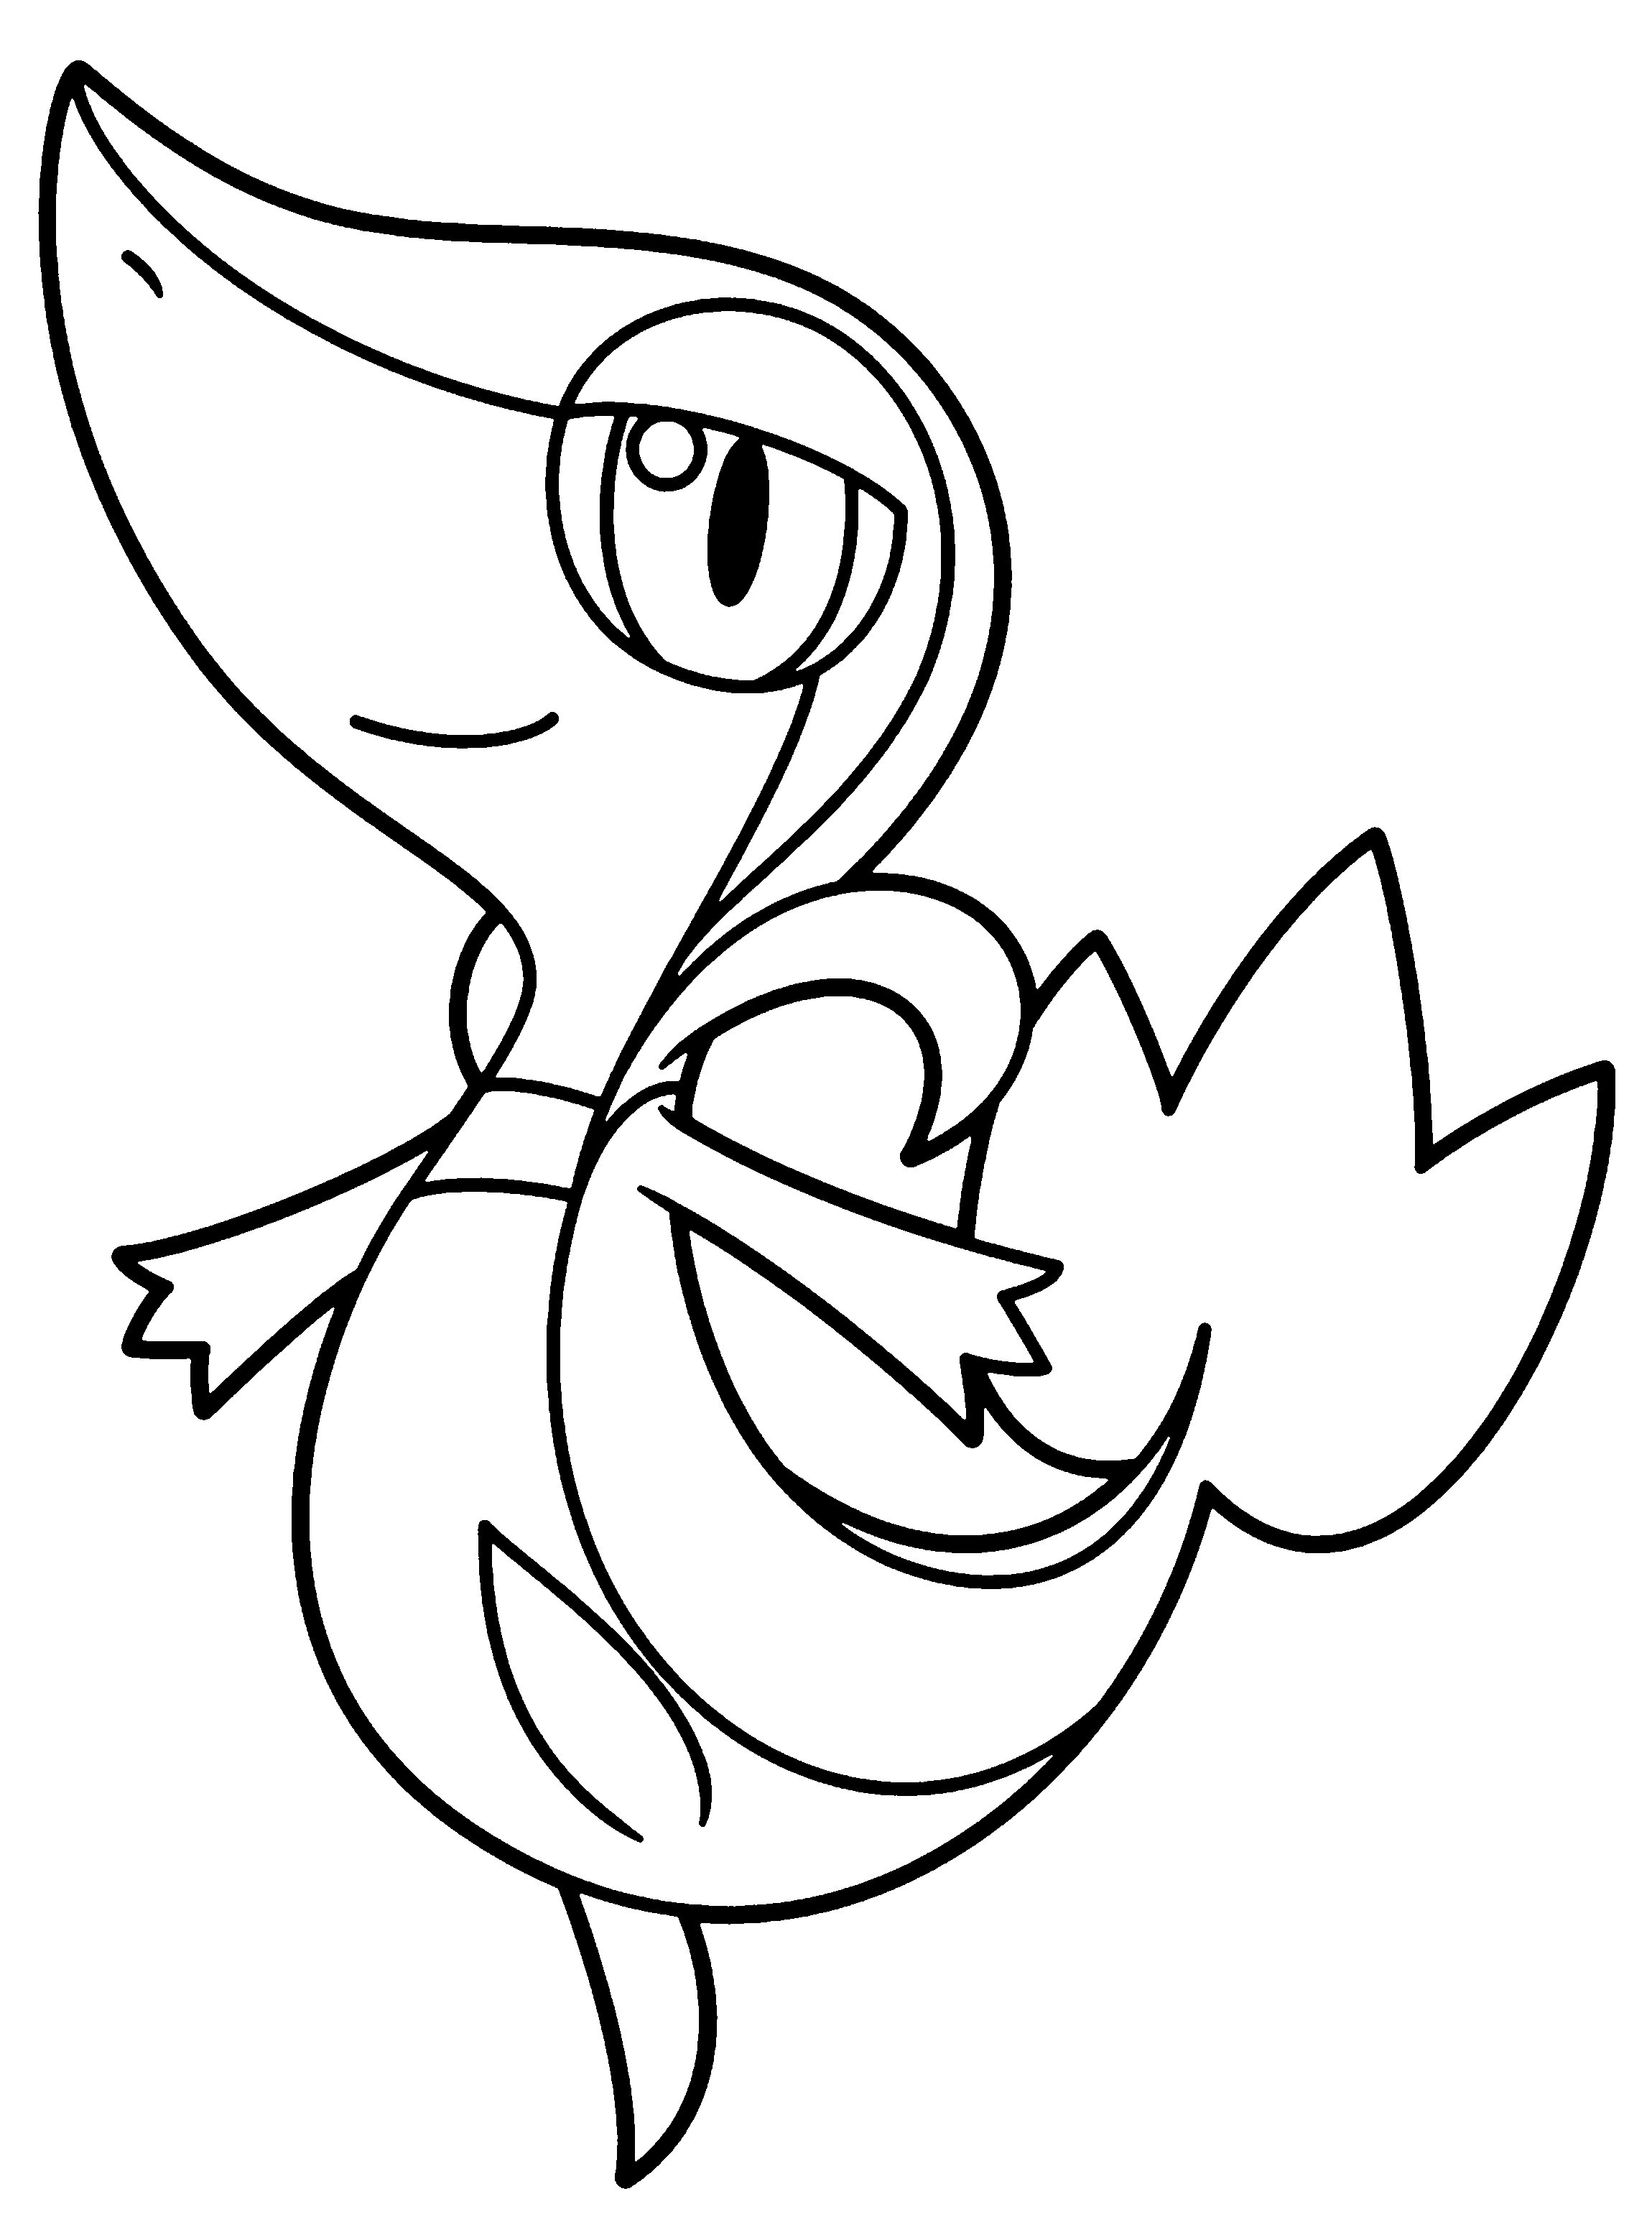 Ivy Pokemon Coloring Pages Wallpaper